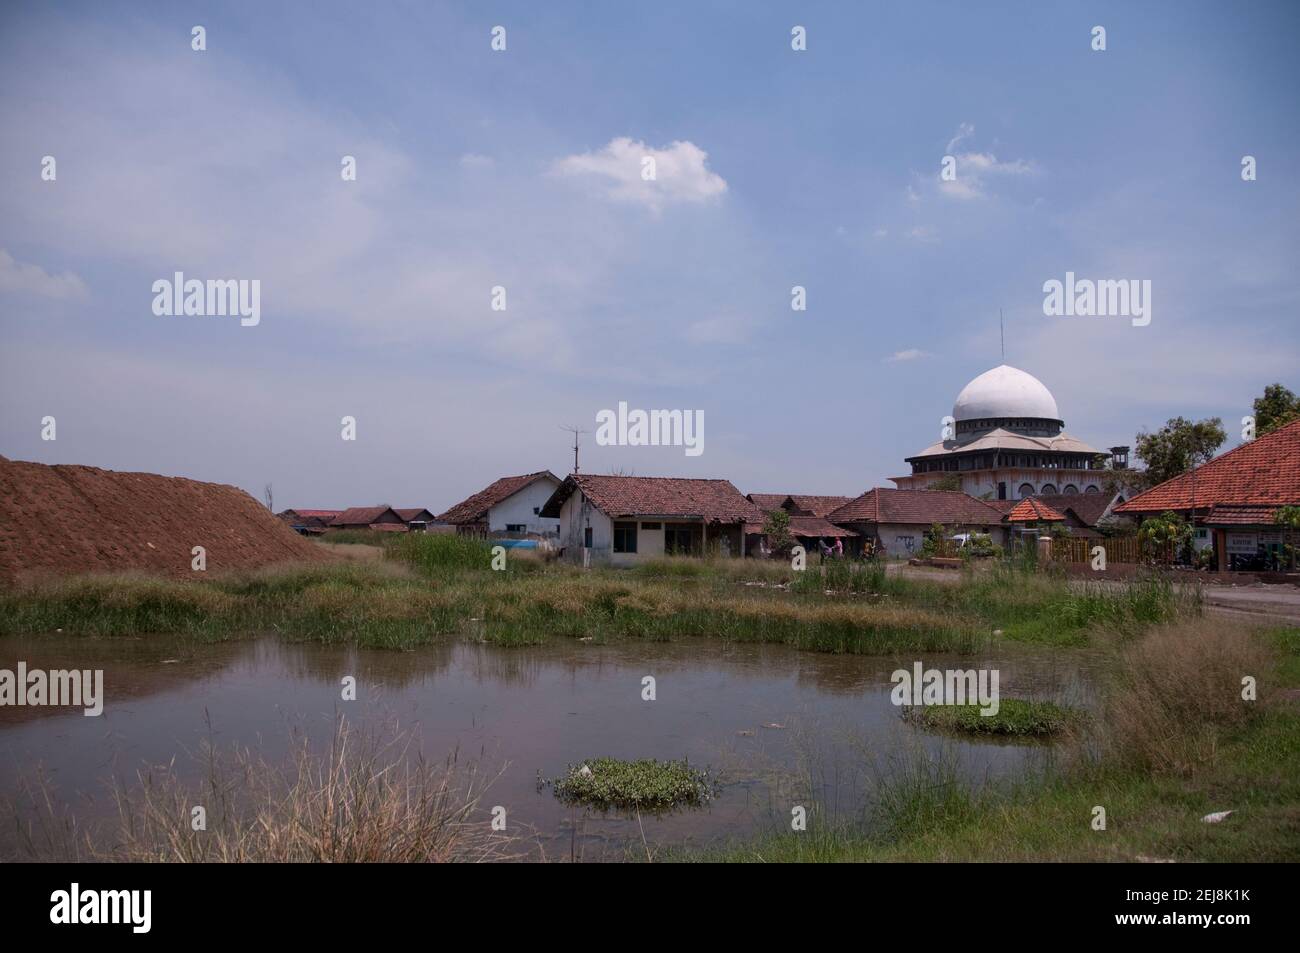 Abandoned village and levee holding back mud lake environmental disaster which developed after drilling incident, Porong Sidoarjo, near Surabaya Stock Photo